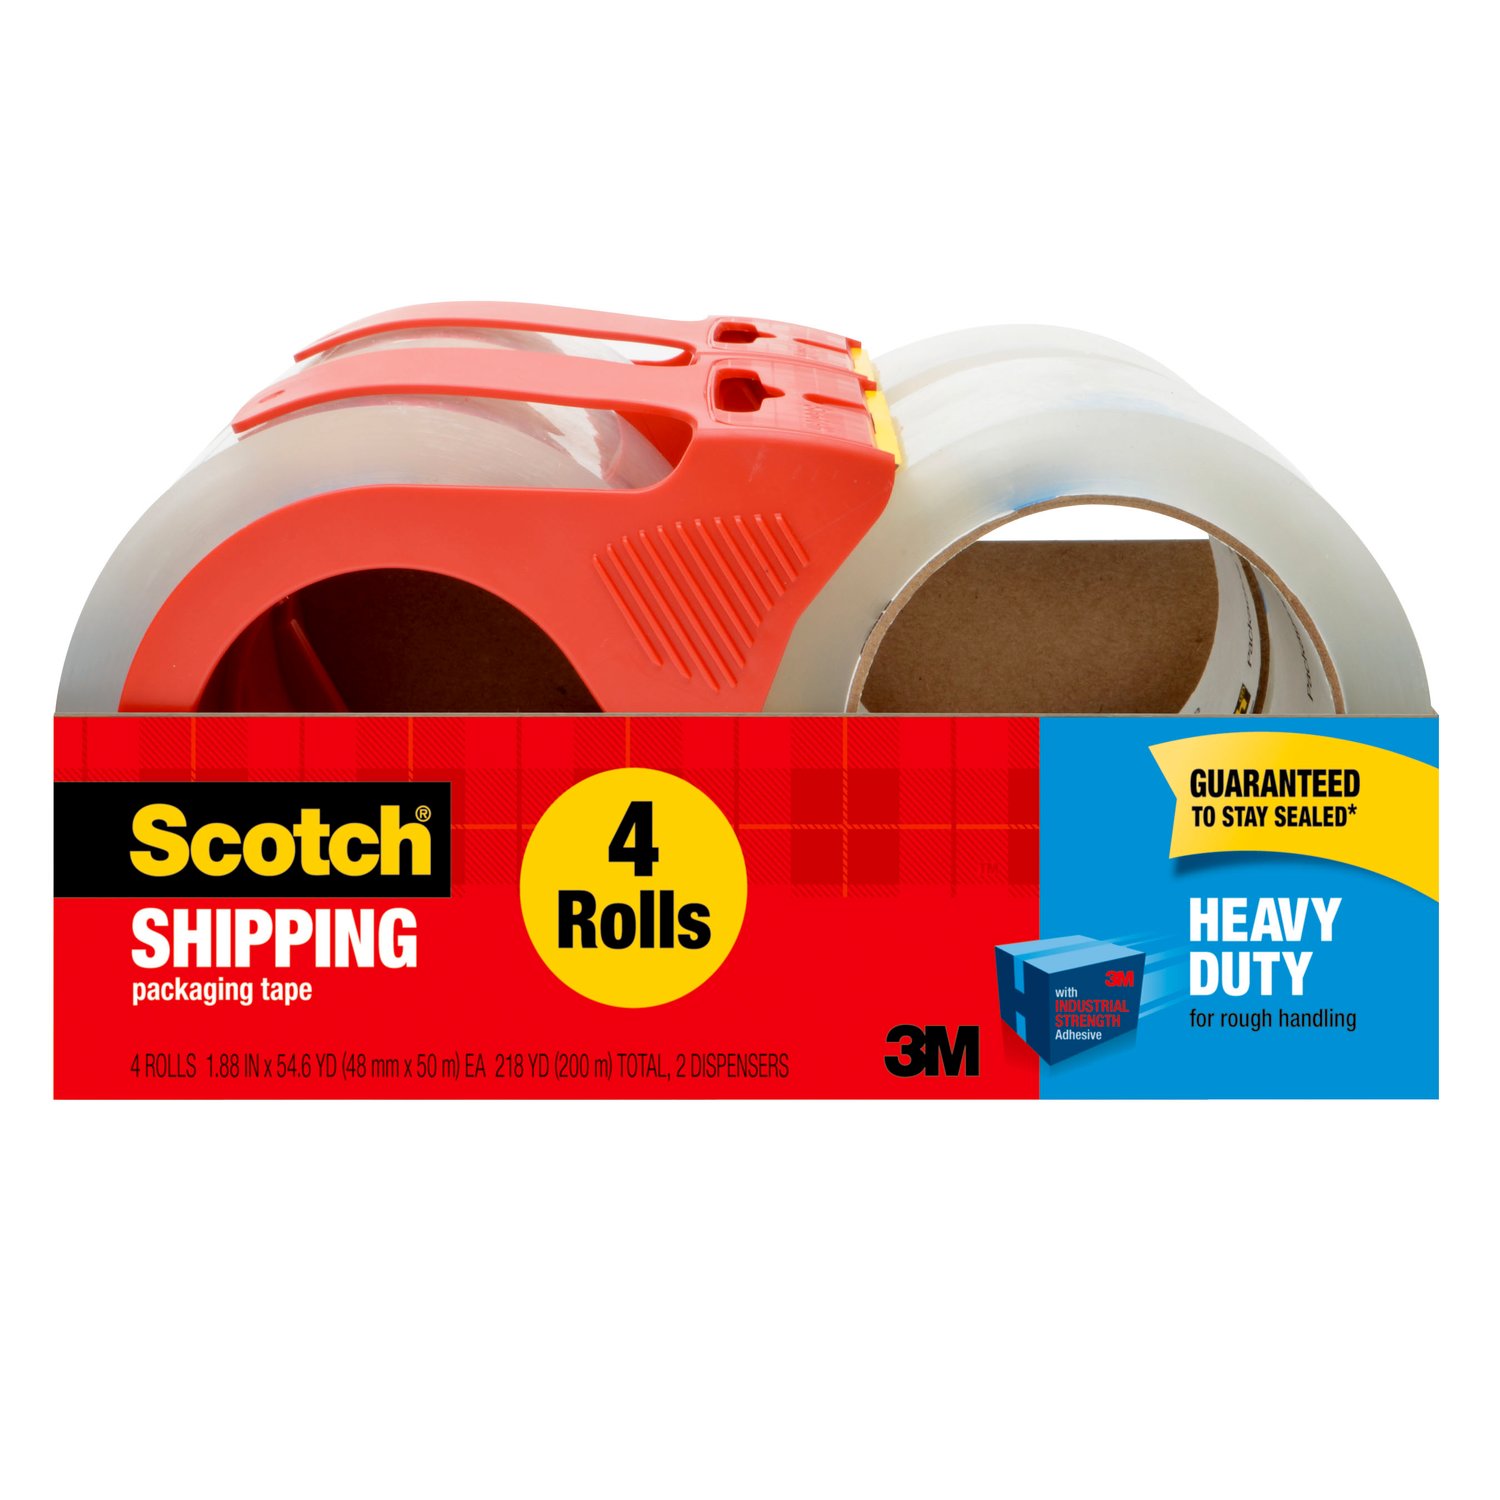 7100175189 - Scotch Heavy Duty Shipping Packaging Tape 3850-4-2RD, 1.88 in x 54.6 yd
(48 mm x 50 m) 4 Rolls with 2 Dispenser